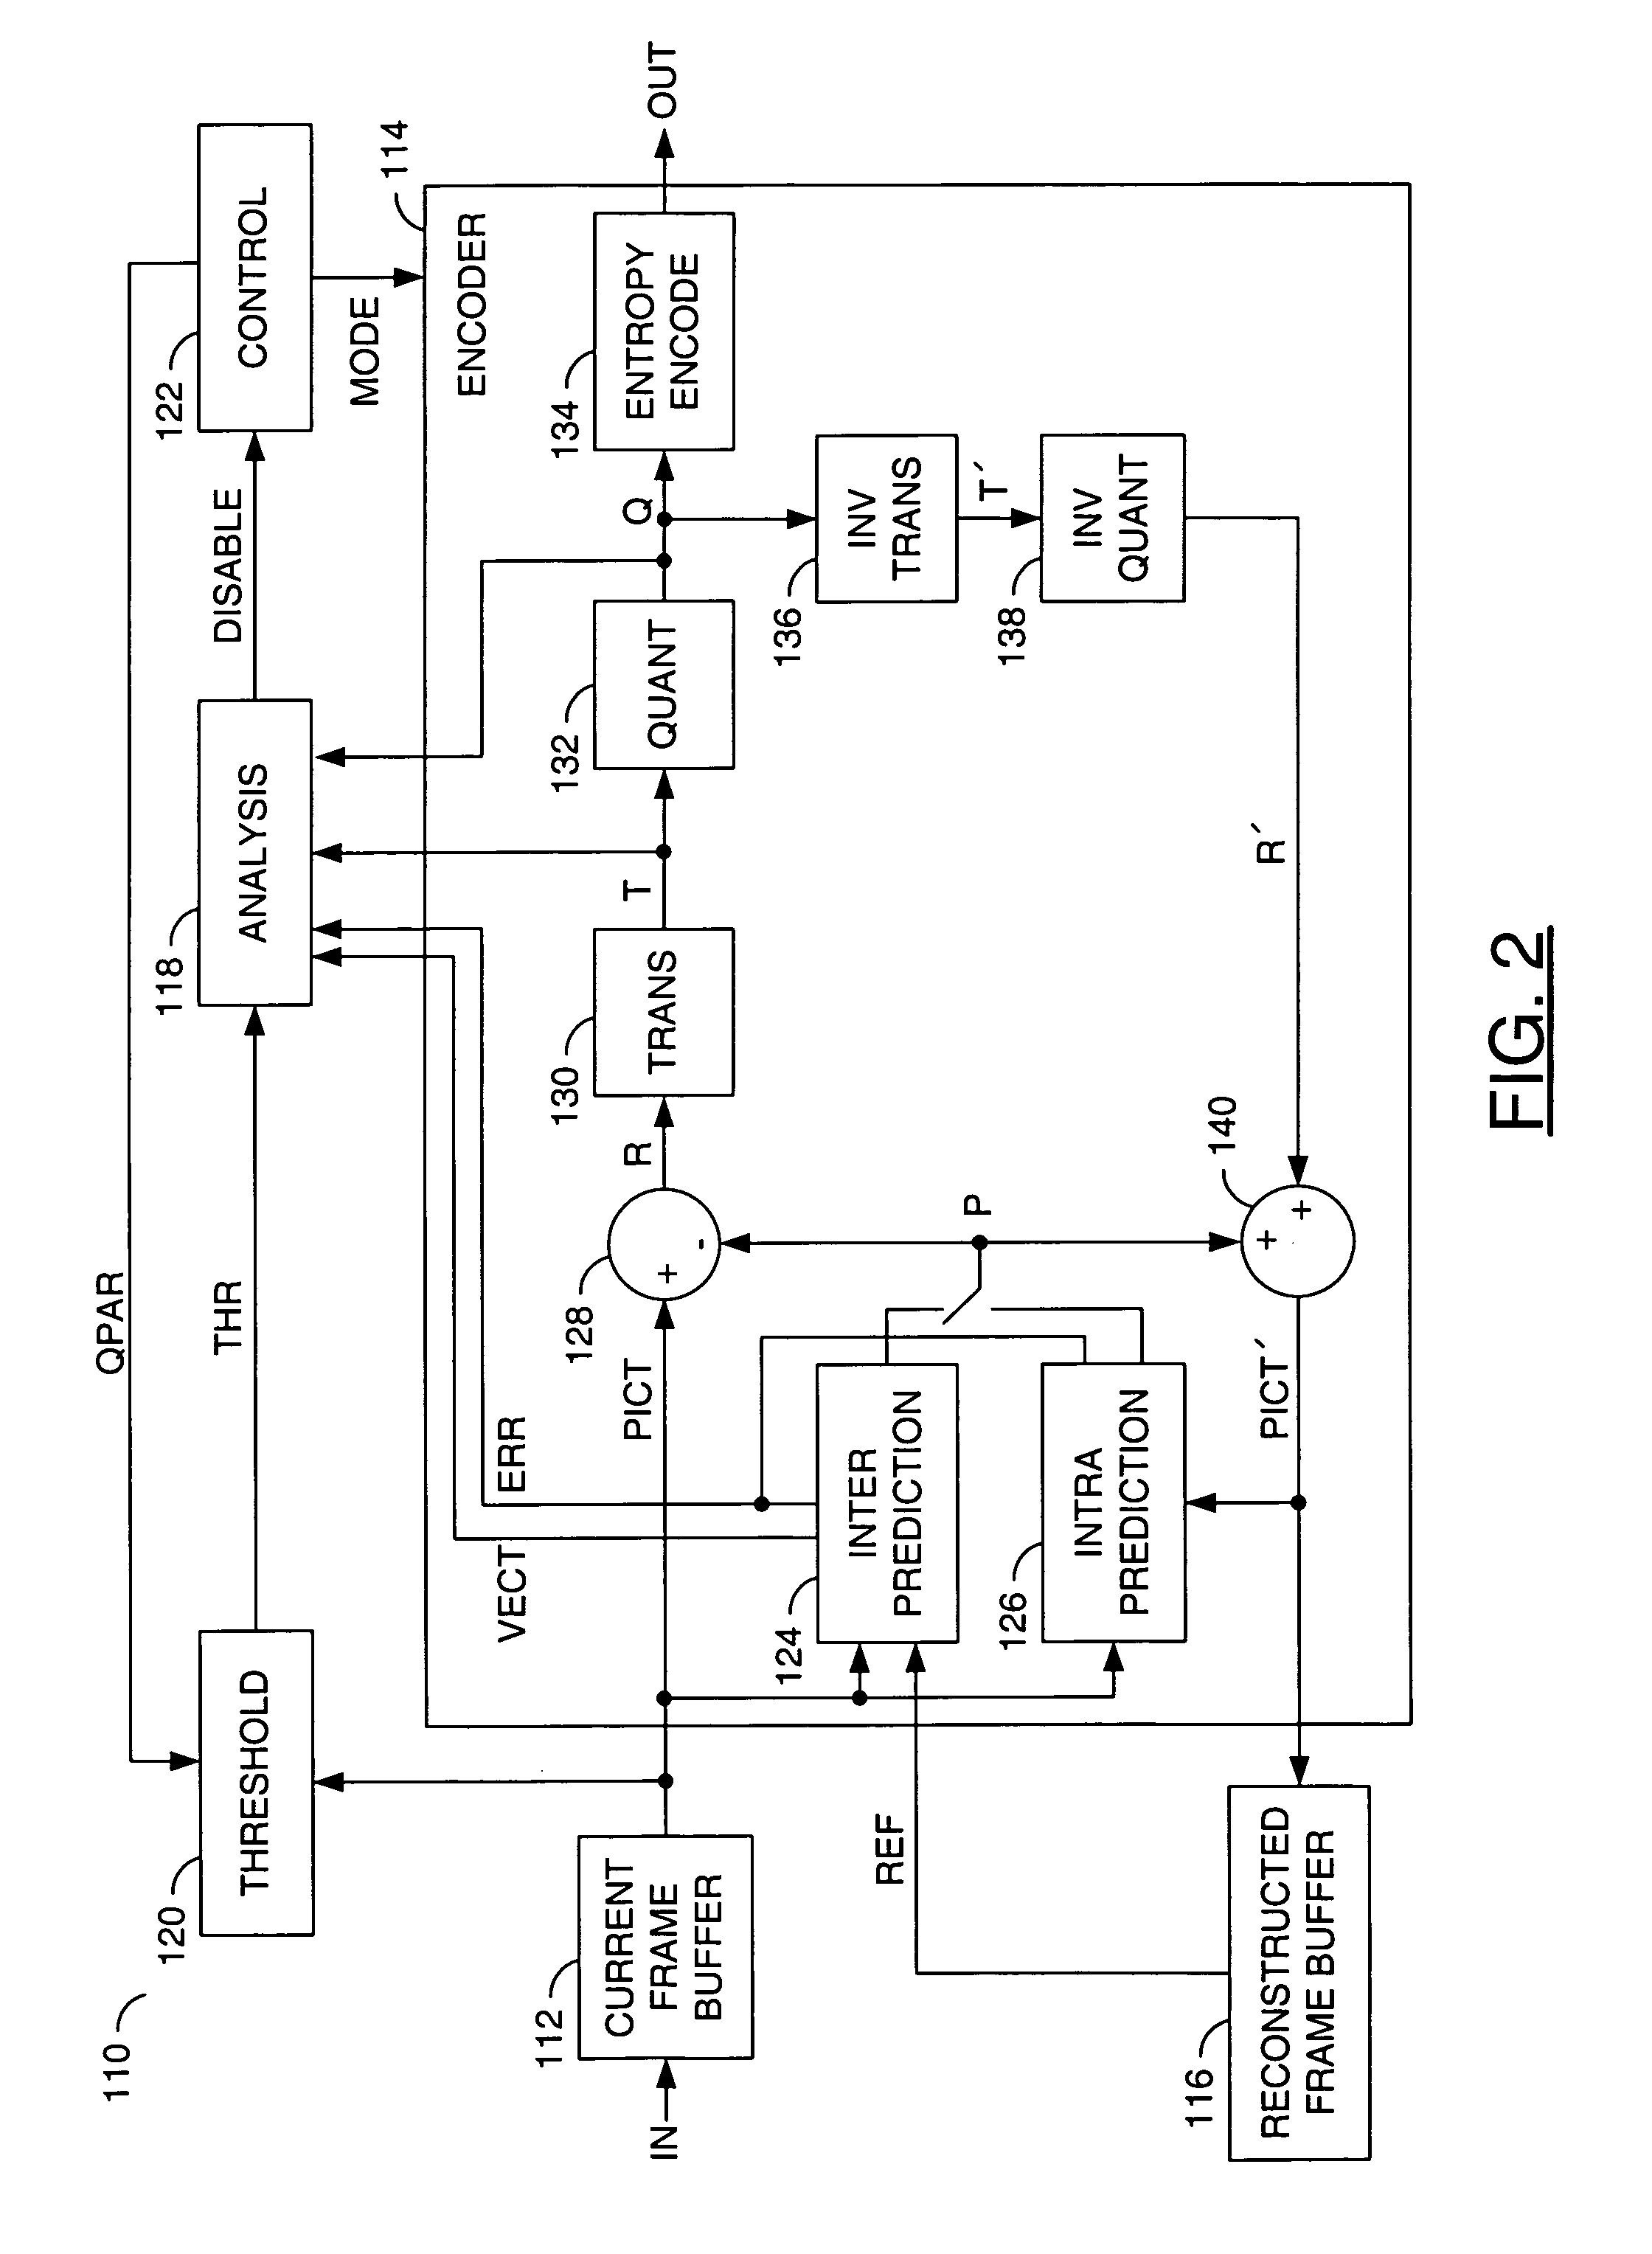 Methods and/or apparatus for controlling zero-residual coding in predictive image/video coding